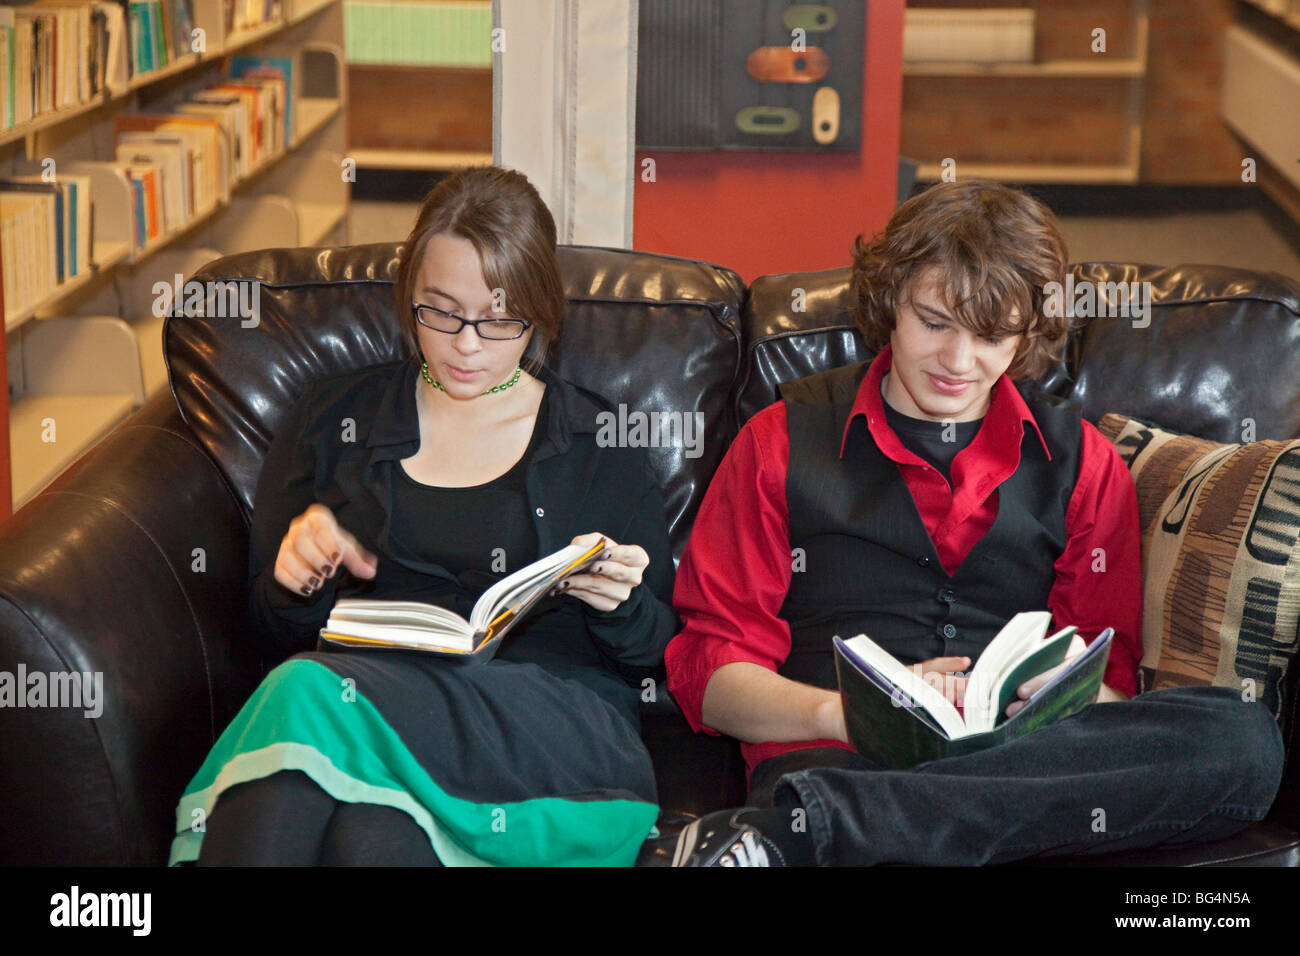 St. Clair Shores, Michigan - Students read books in the media center (library) at Lake Shore High School. Stock Photo